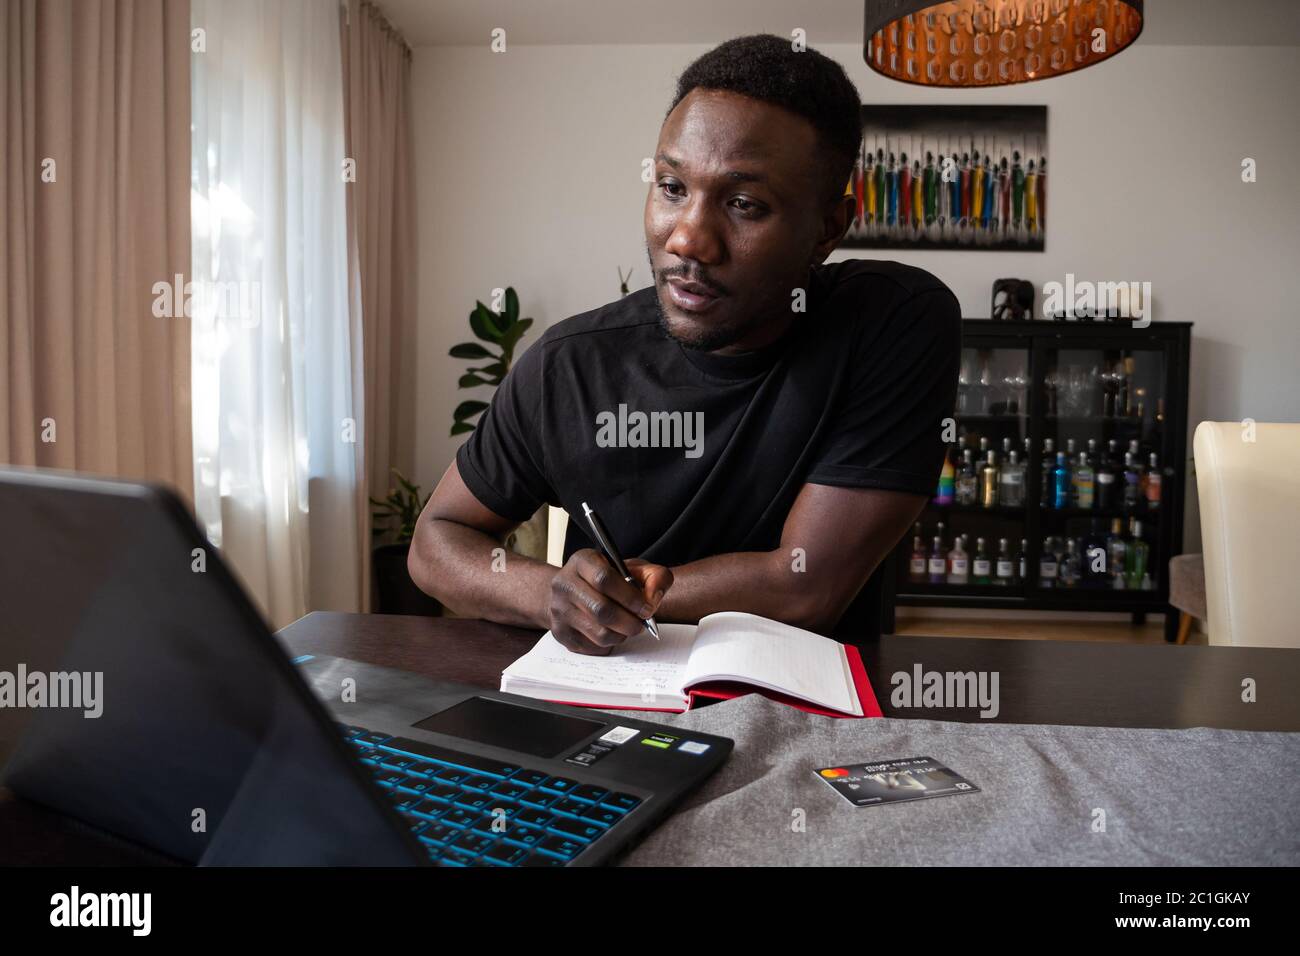 Young black man taking pen and paper notes from laptop seated in living room. Medium shot. Stock Photo